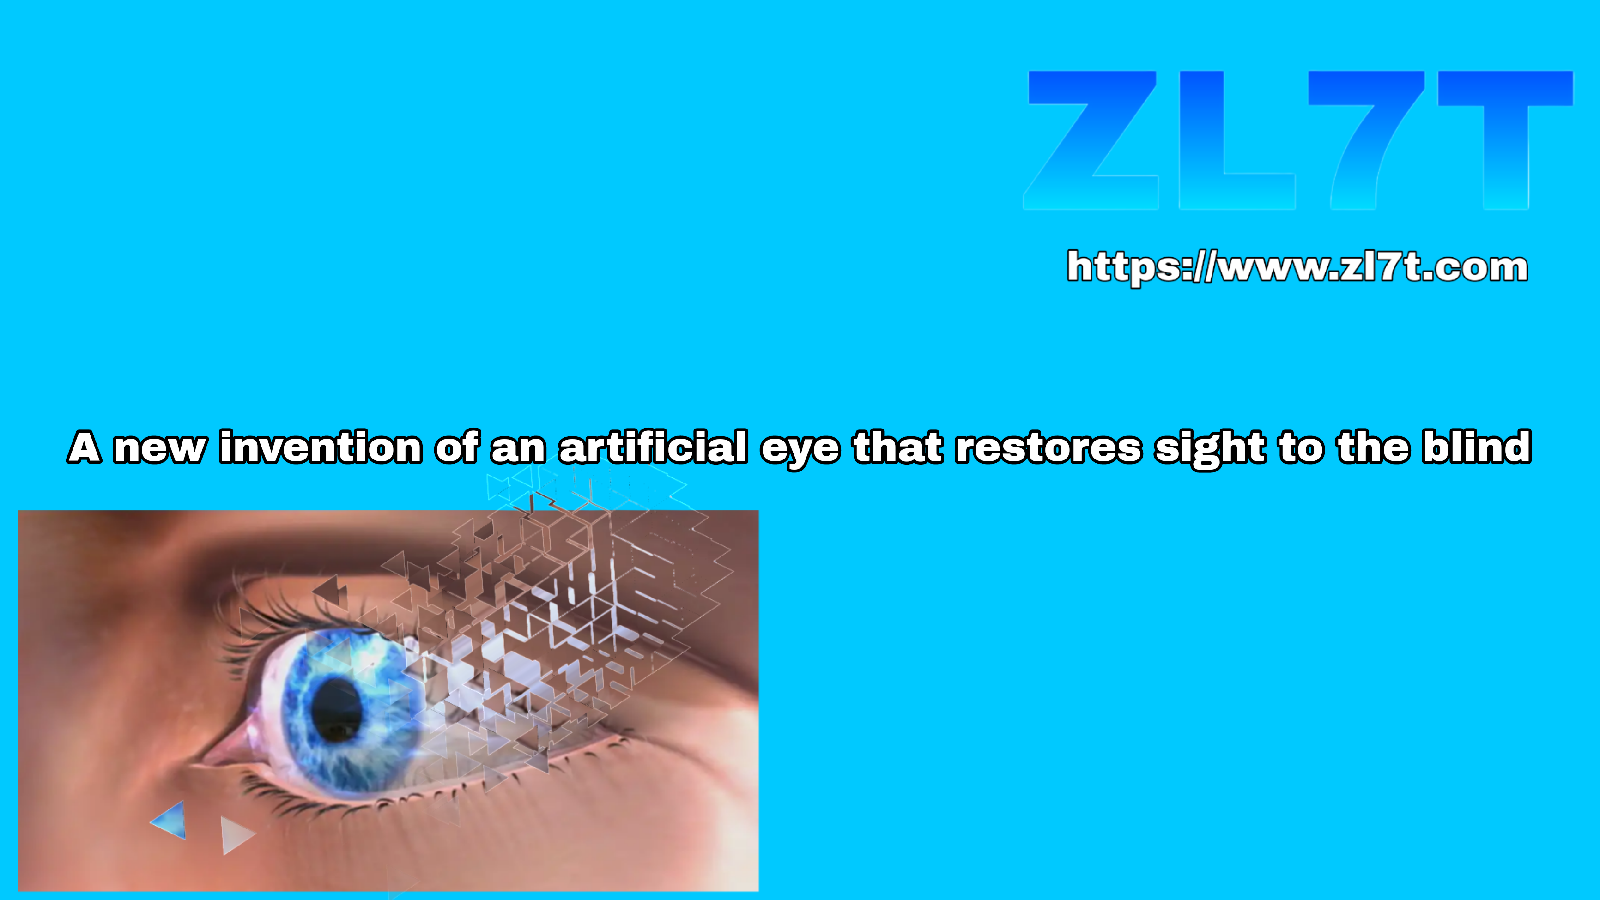 A new invention of an artificial eye that restores sight to the blind